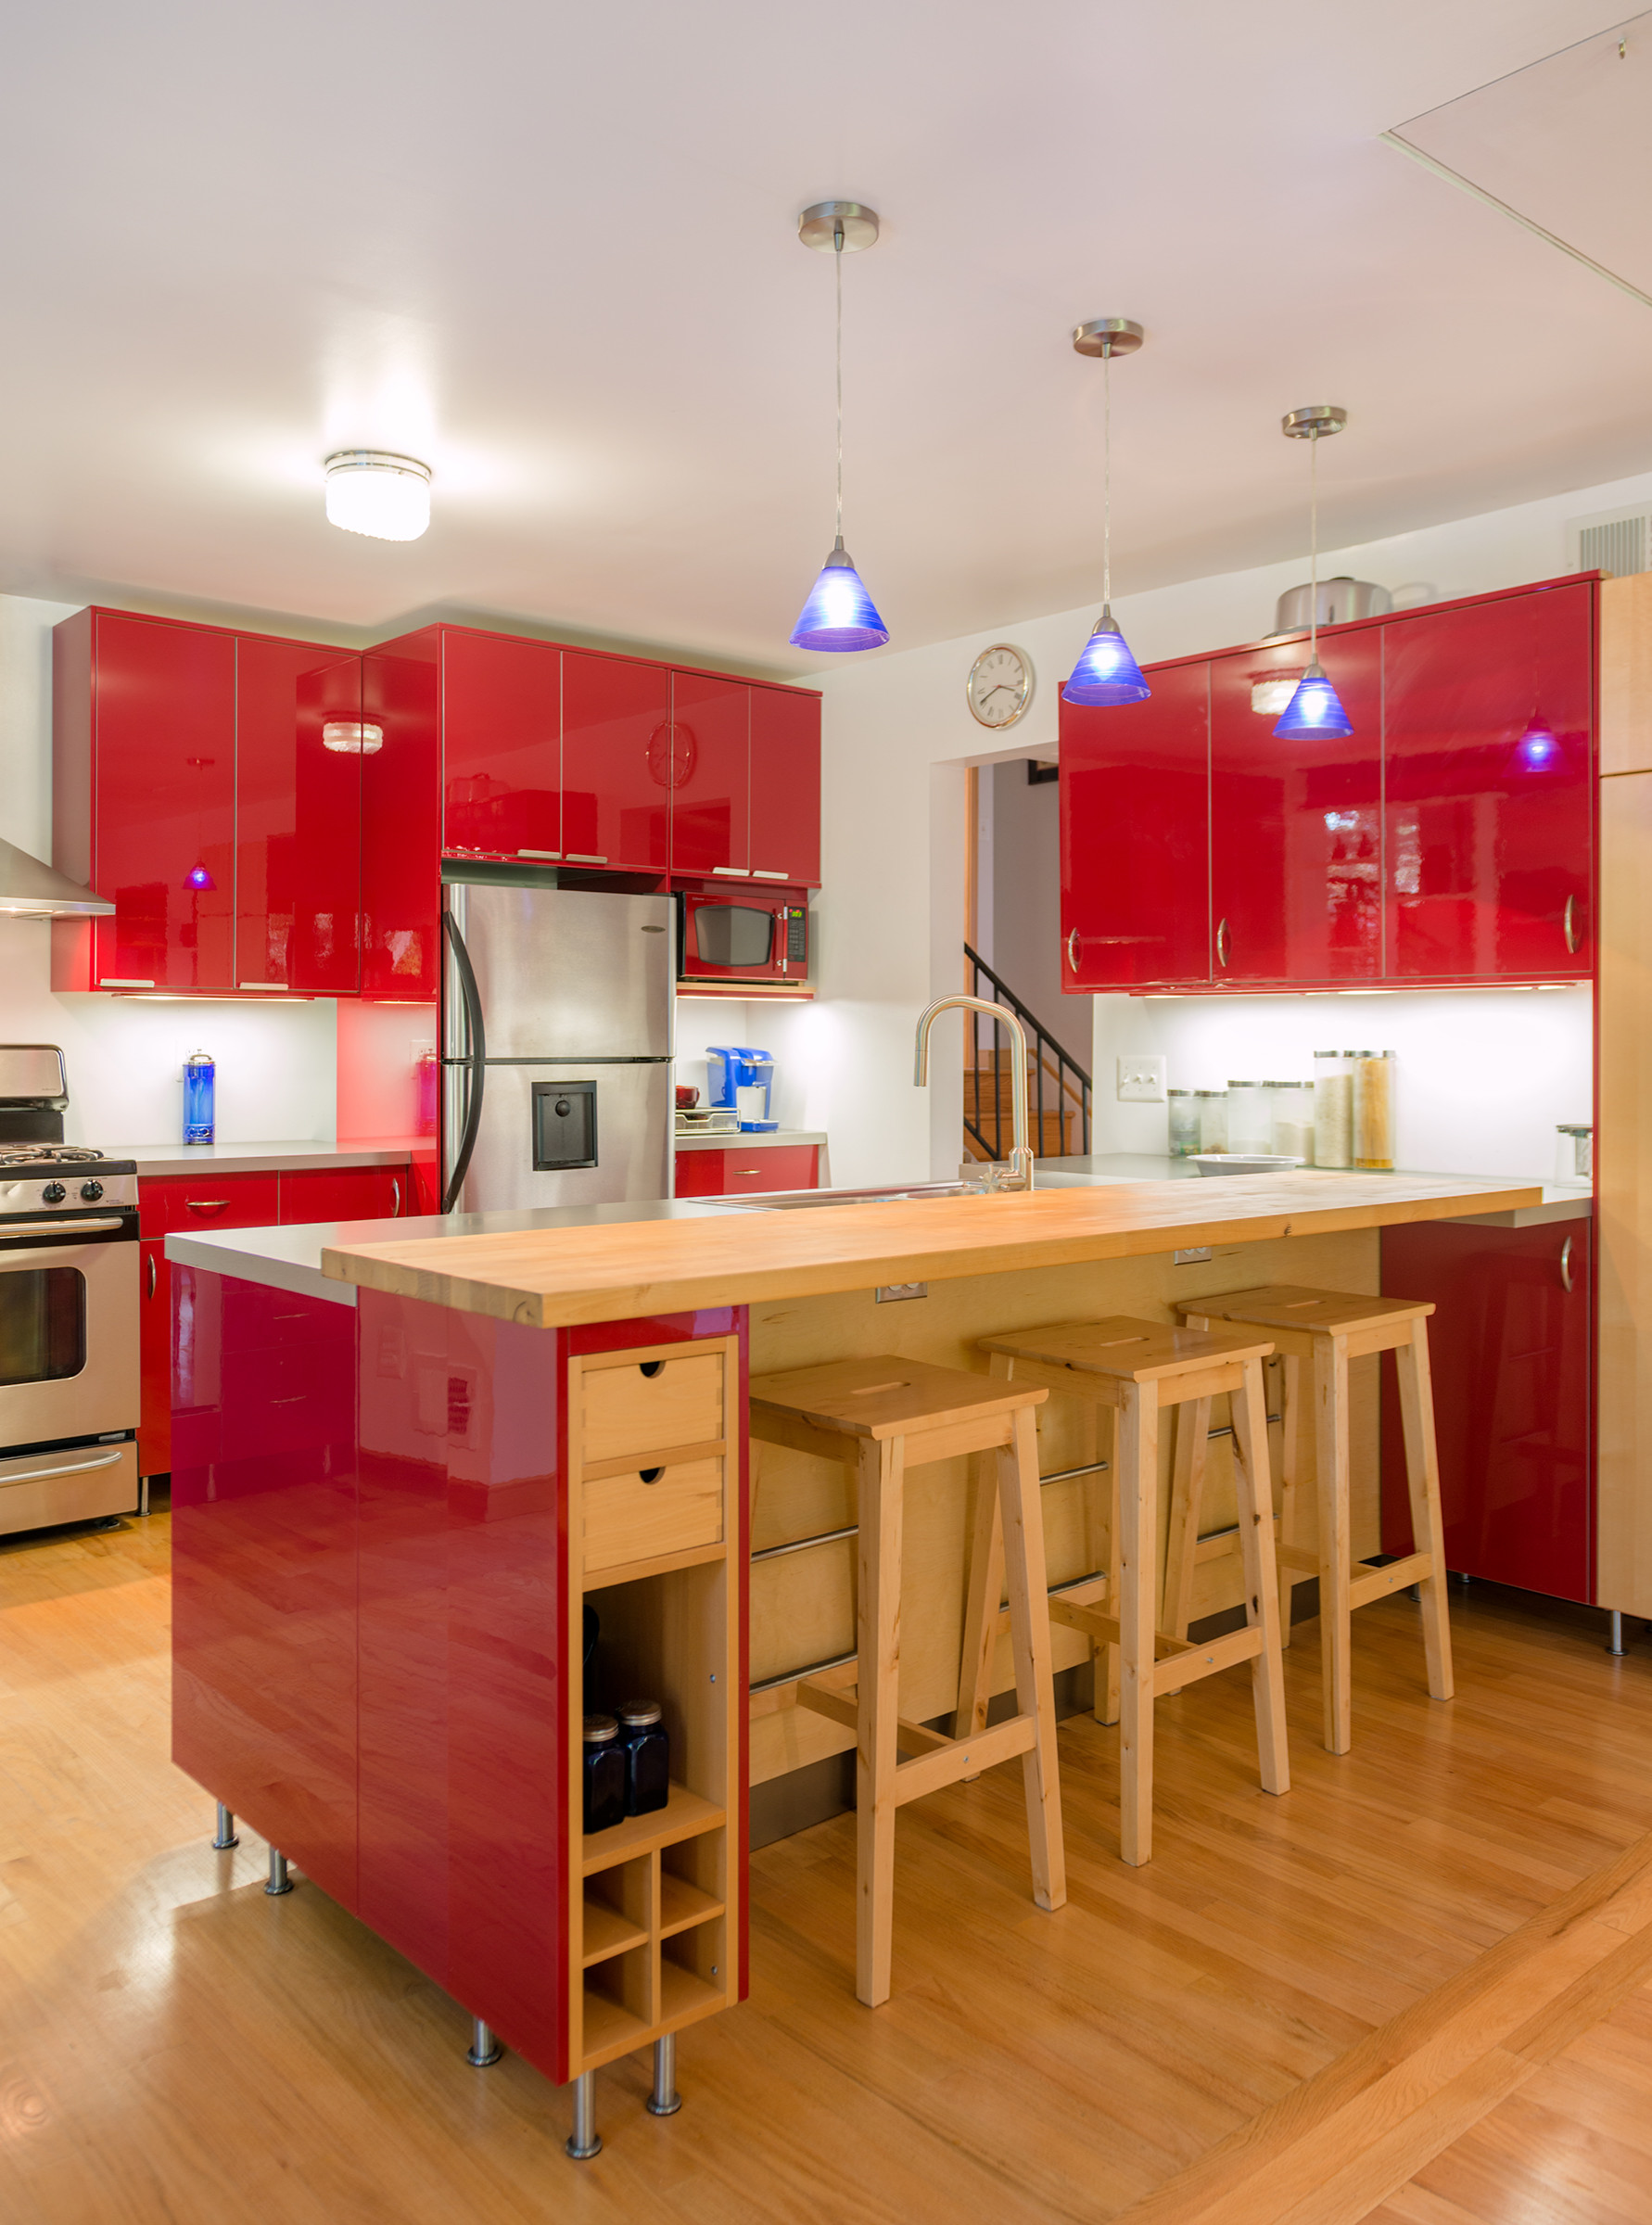 Red kitchen ideas – cabinets and details in shades from rust to scarlet